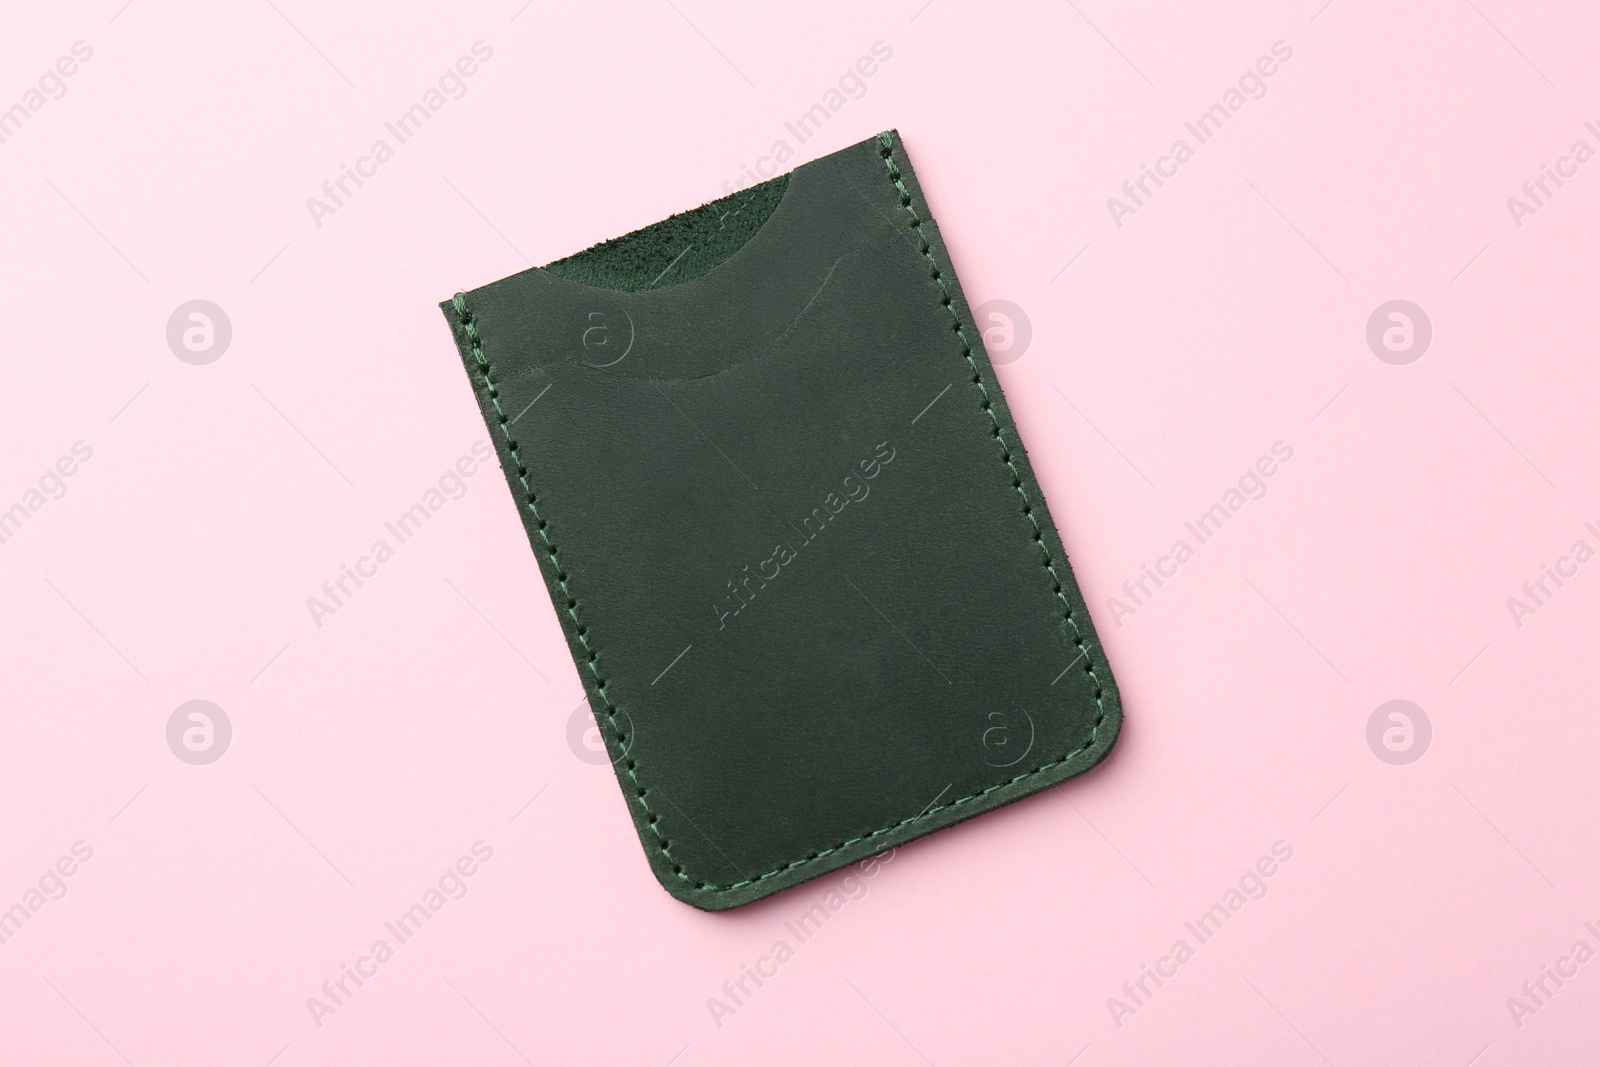 Photo of Empty leather card holder on pink background, top view